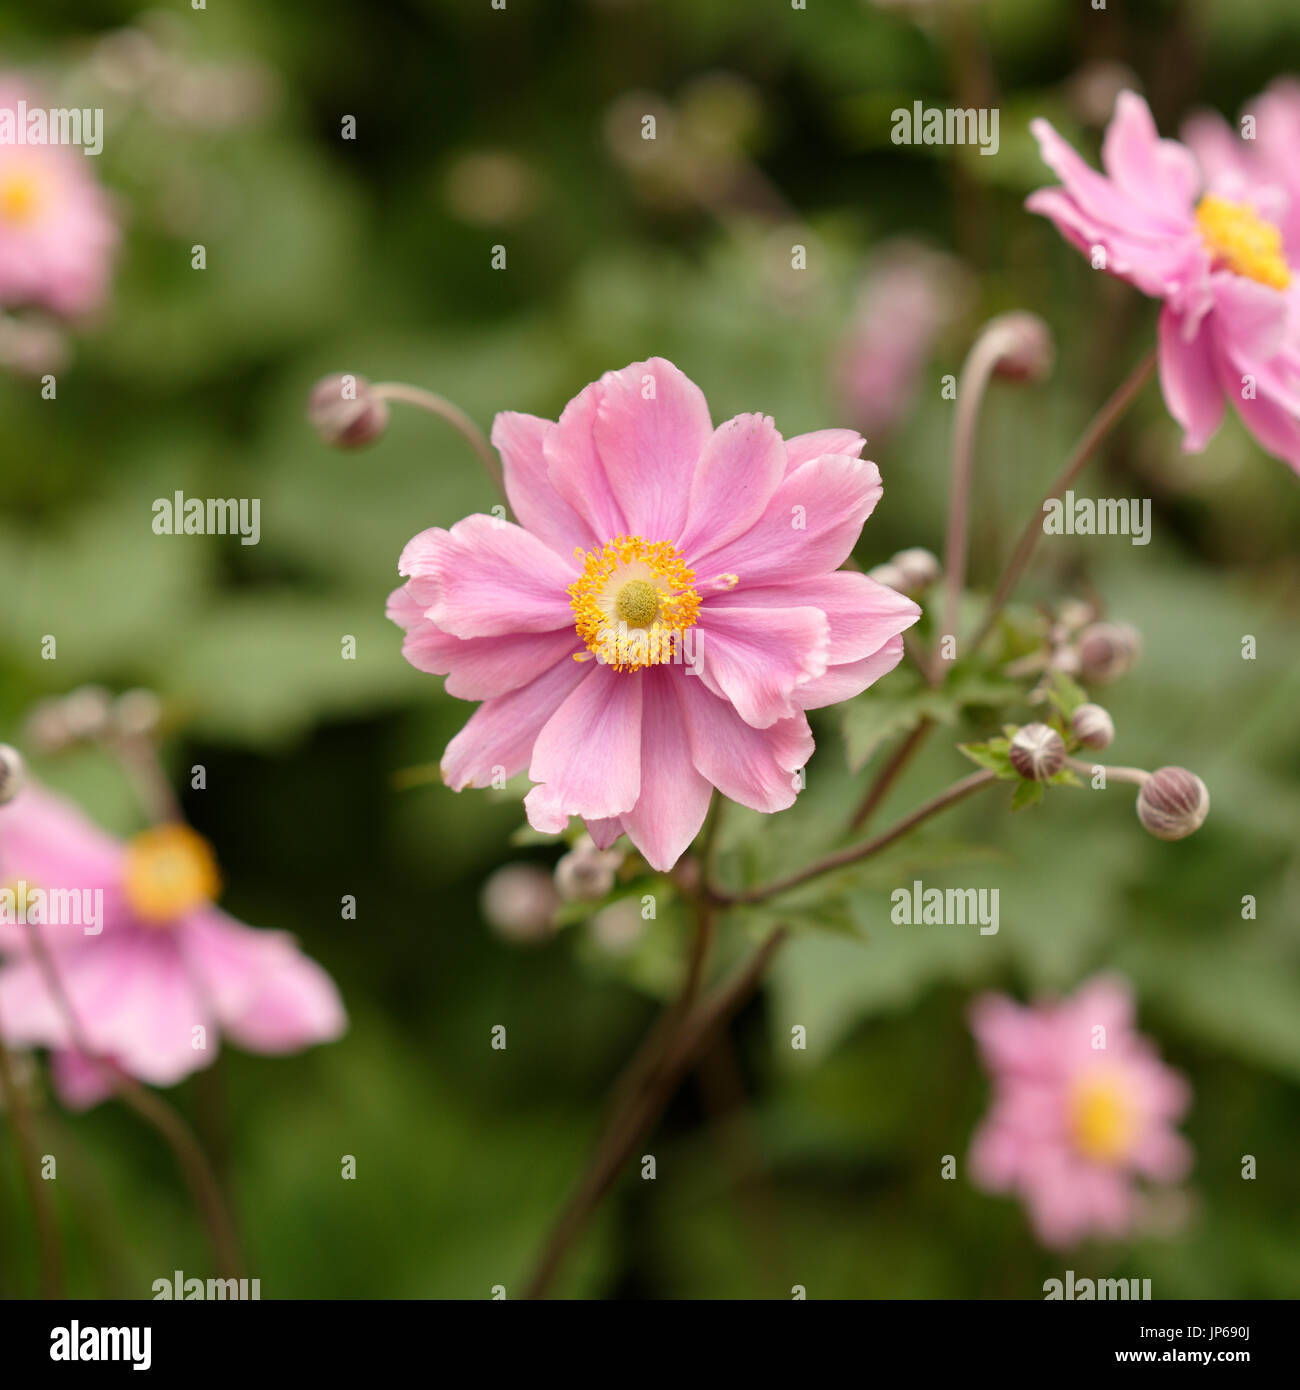 Anemone hupehensis flower head with soft focus foliage and flower heads in the background in the british countryside uk Stock Photo